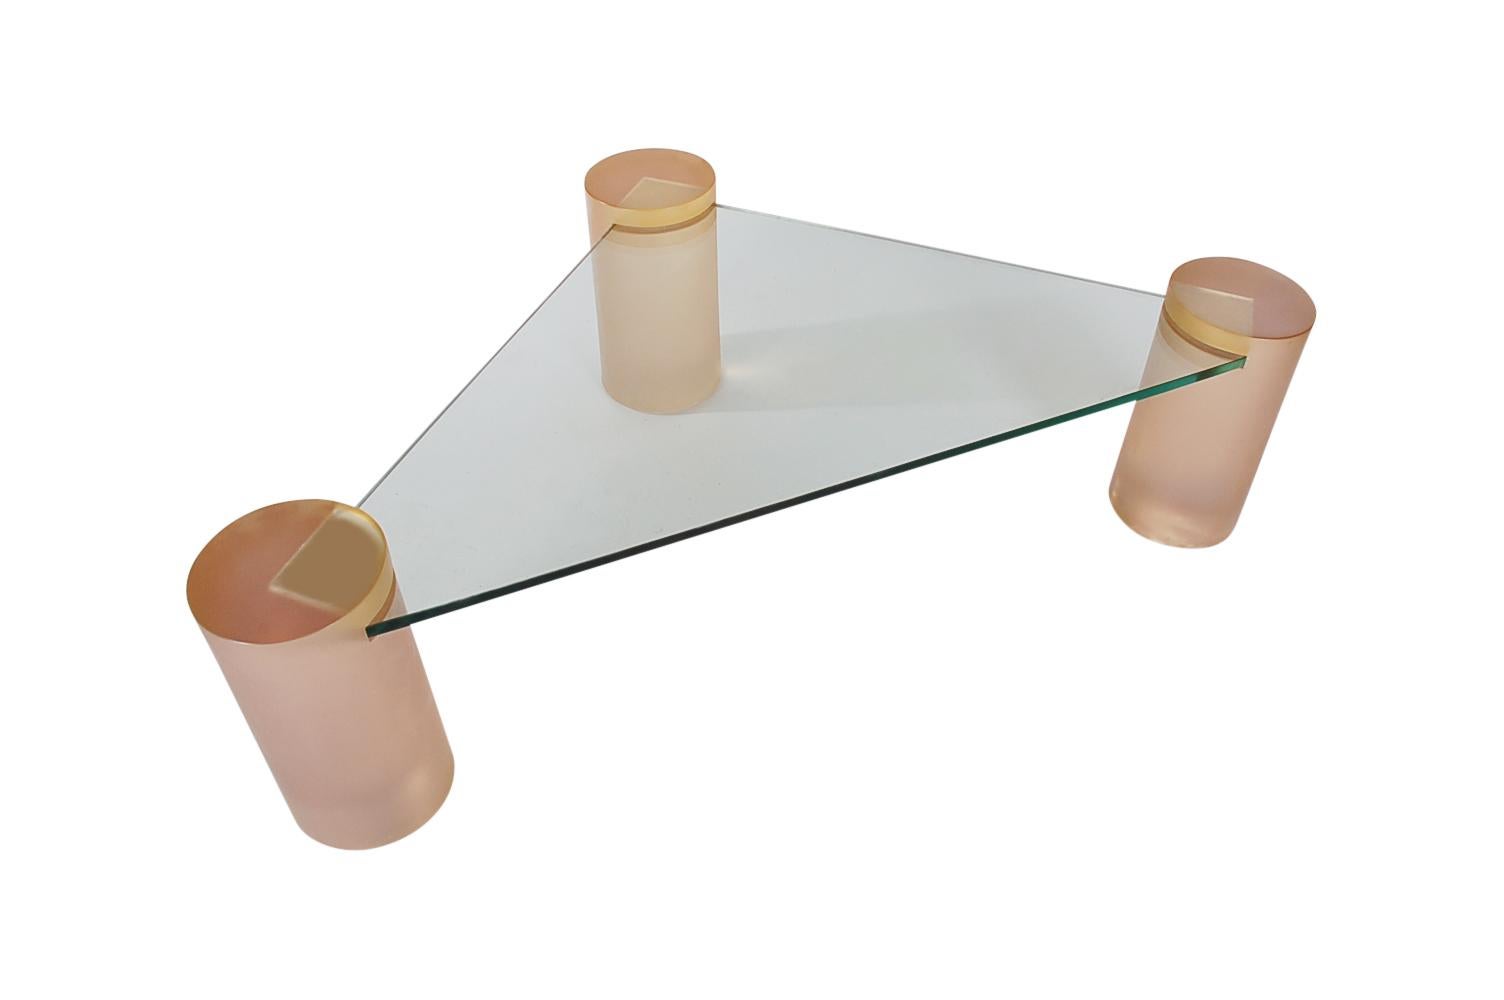 A super neat design from the 1980s. This table features three solid acrylic pedestals with a light blush pink color, and a floating piece of triangular glass.